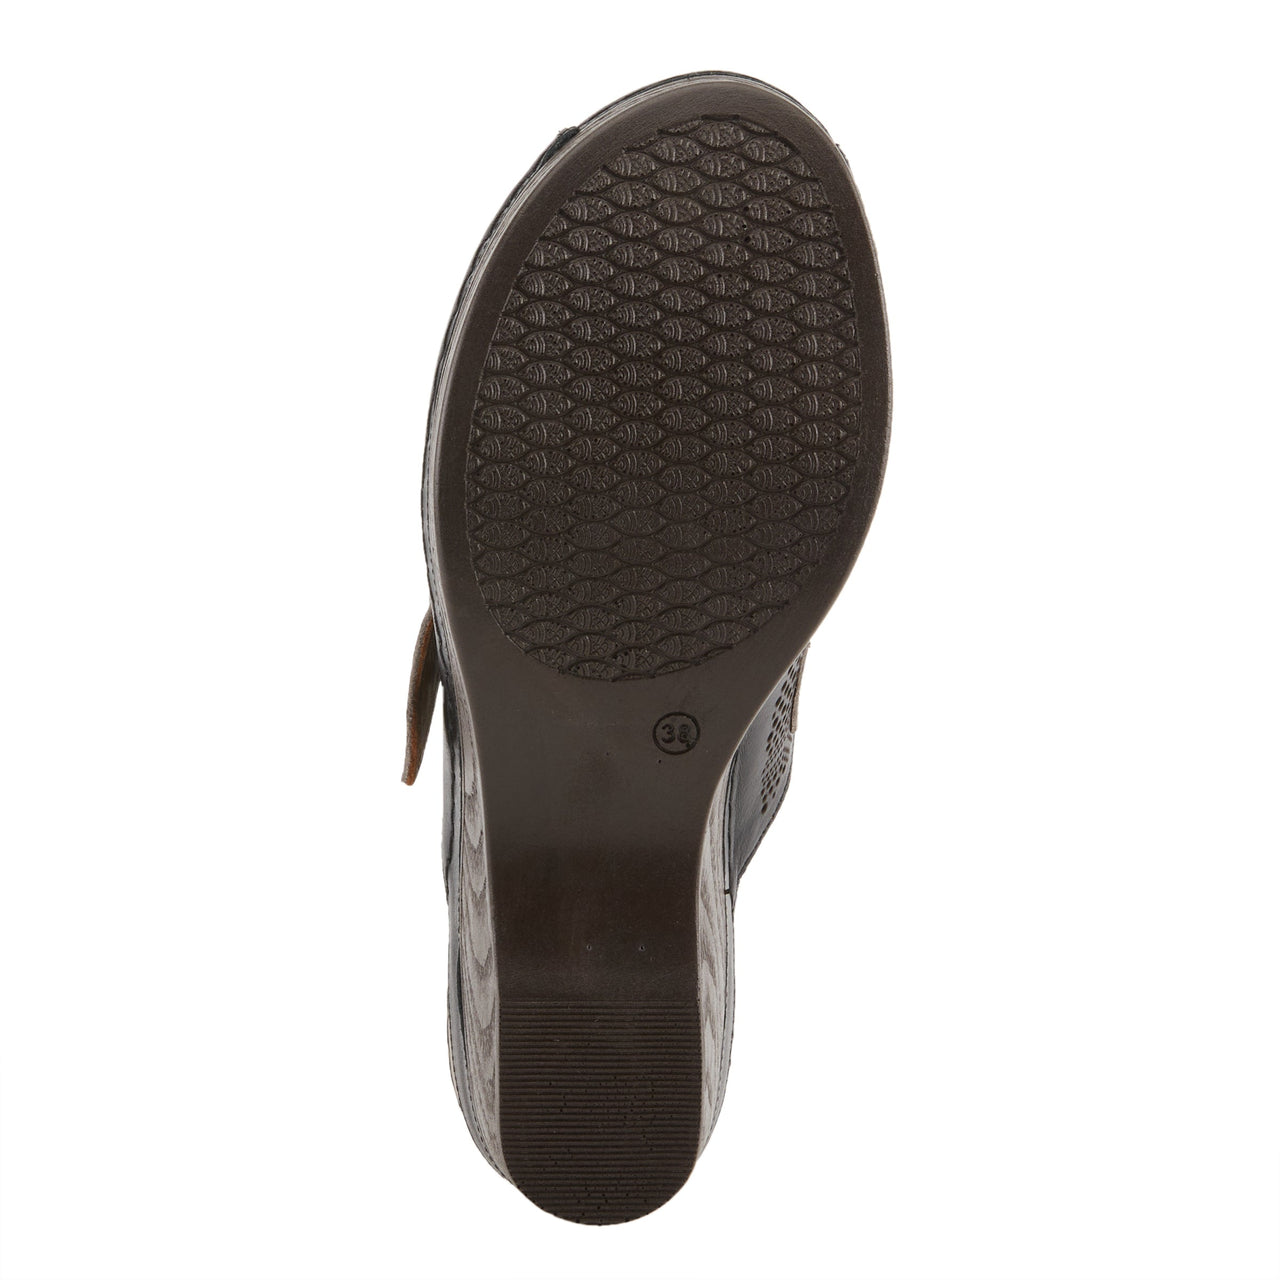 Stylish and comfortable Spring Step Momelle sandals with leather straps and cushioned footbed for all-day support and wear